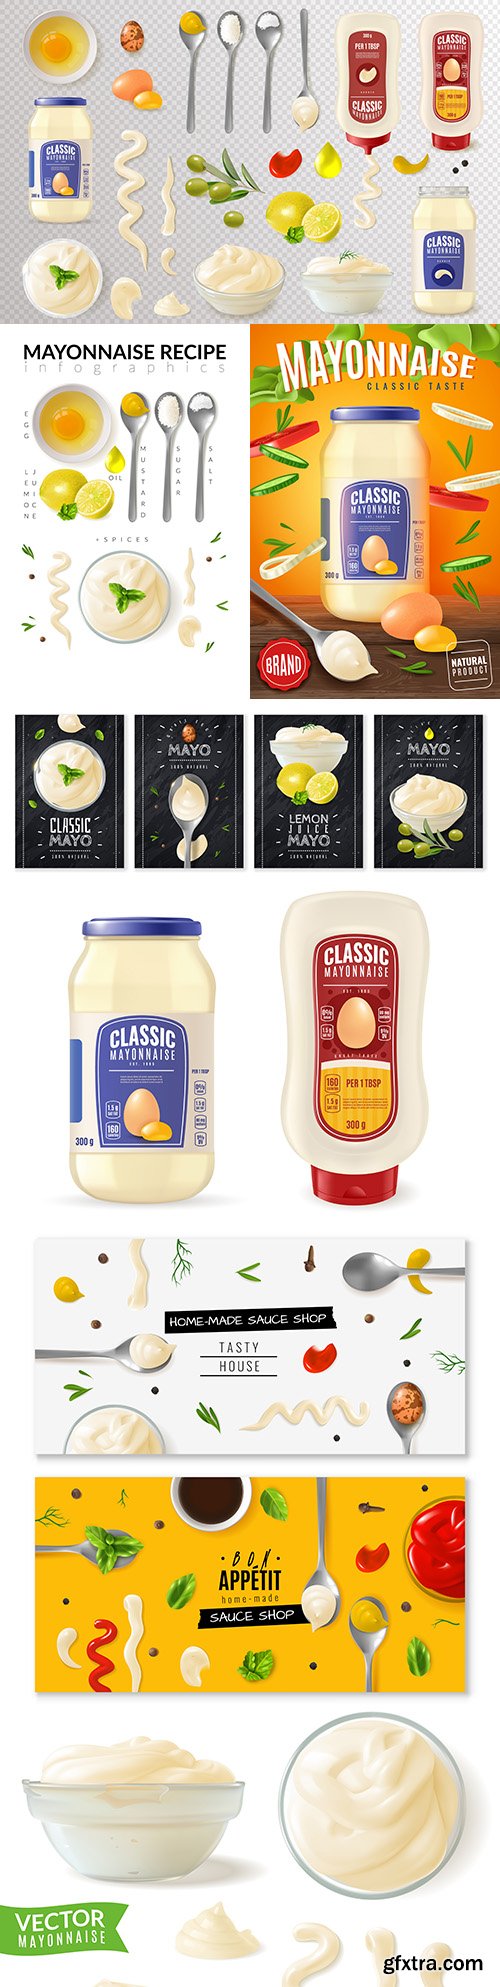 Realistic illustrations of glass can mayonnaise and recipexA;